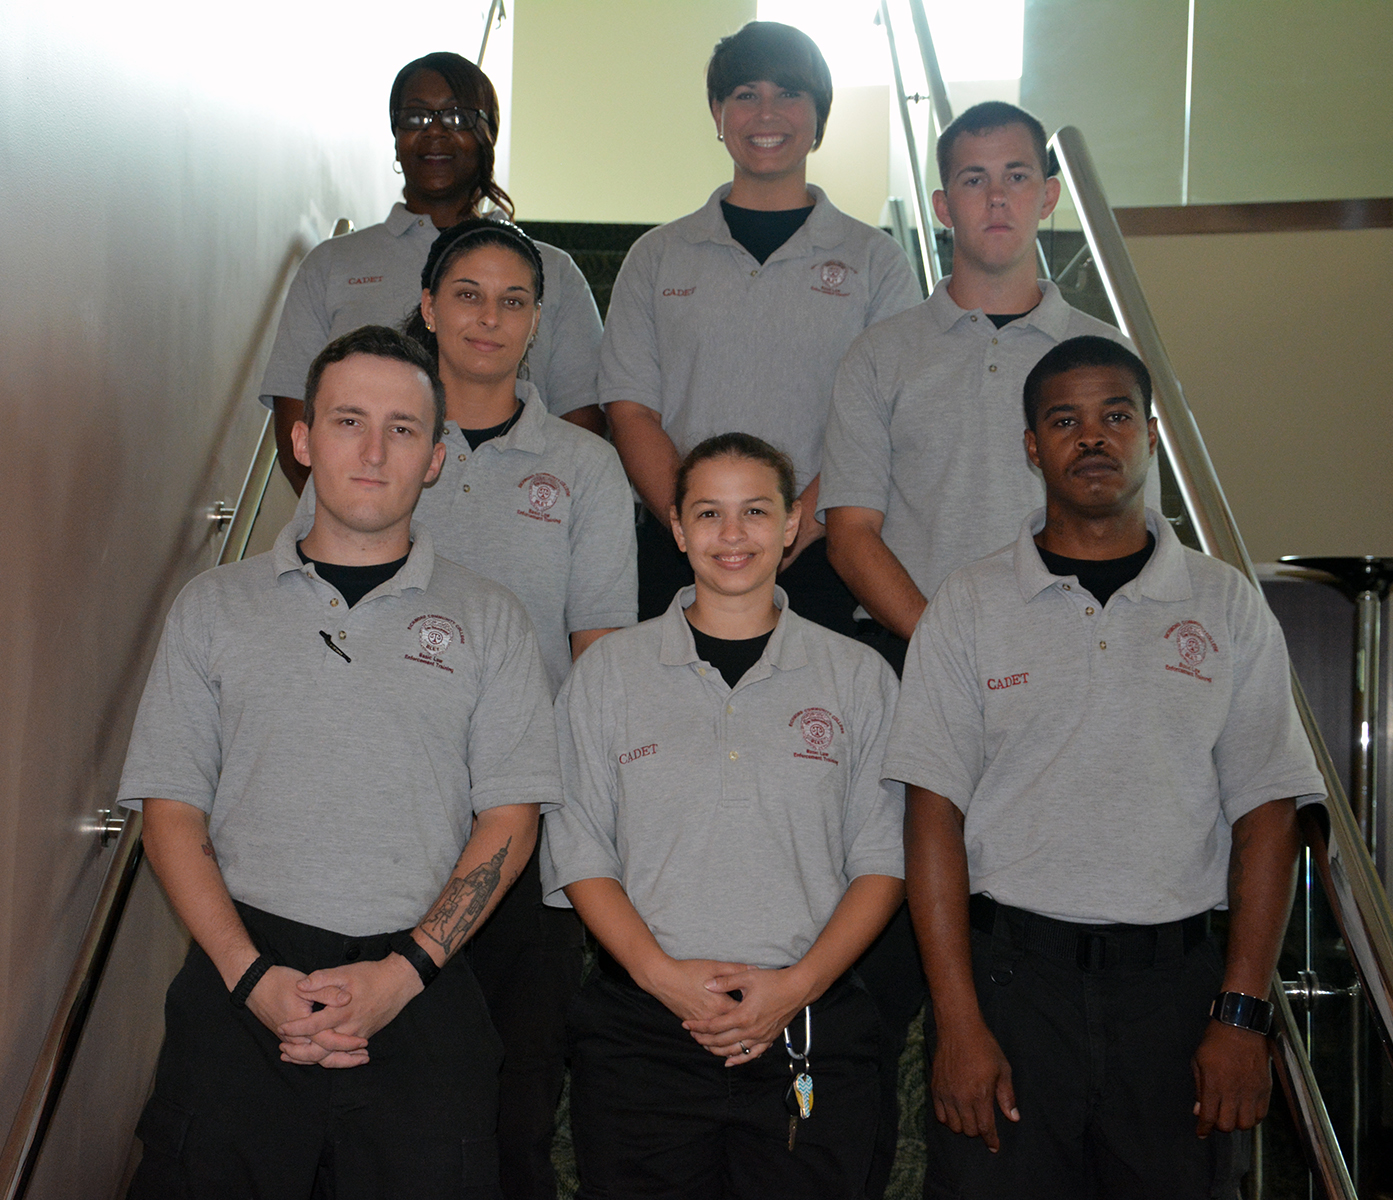 Pictured are the cadets who graduated from Richmond Community College’s Basic Law Enforcement Training program, first row, left to right, David L. Blackmon, Nila D. Kettlety and Maculay T. Duparl; second row, left to right, Keeley S. Sutton and Jonathan B. Thrush; and top row, left to right, Tonya M. Gay and Courtey T. Jarrell.